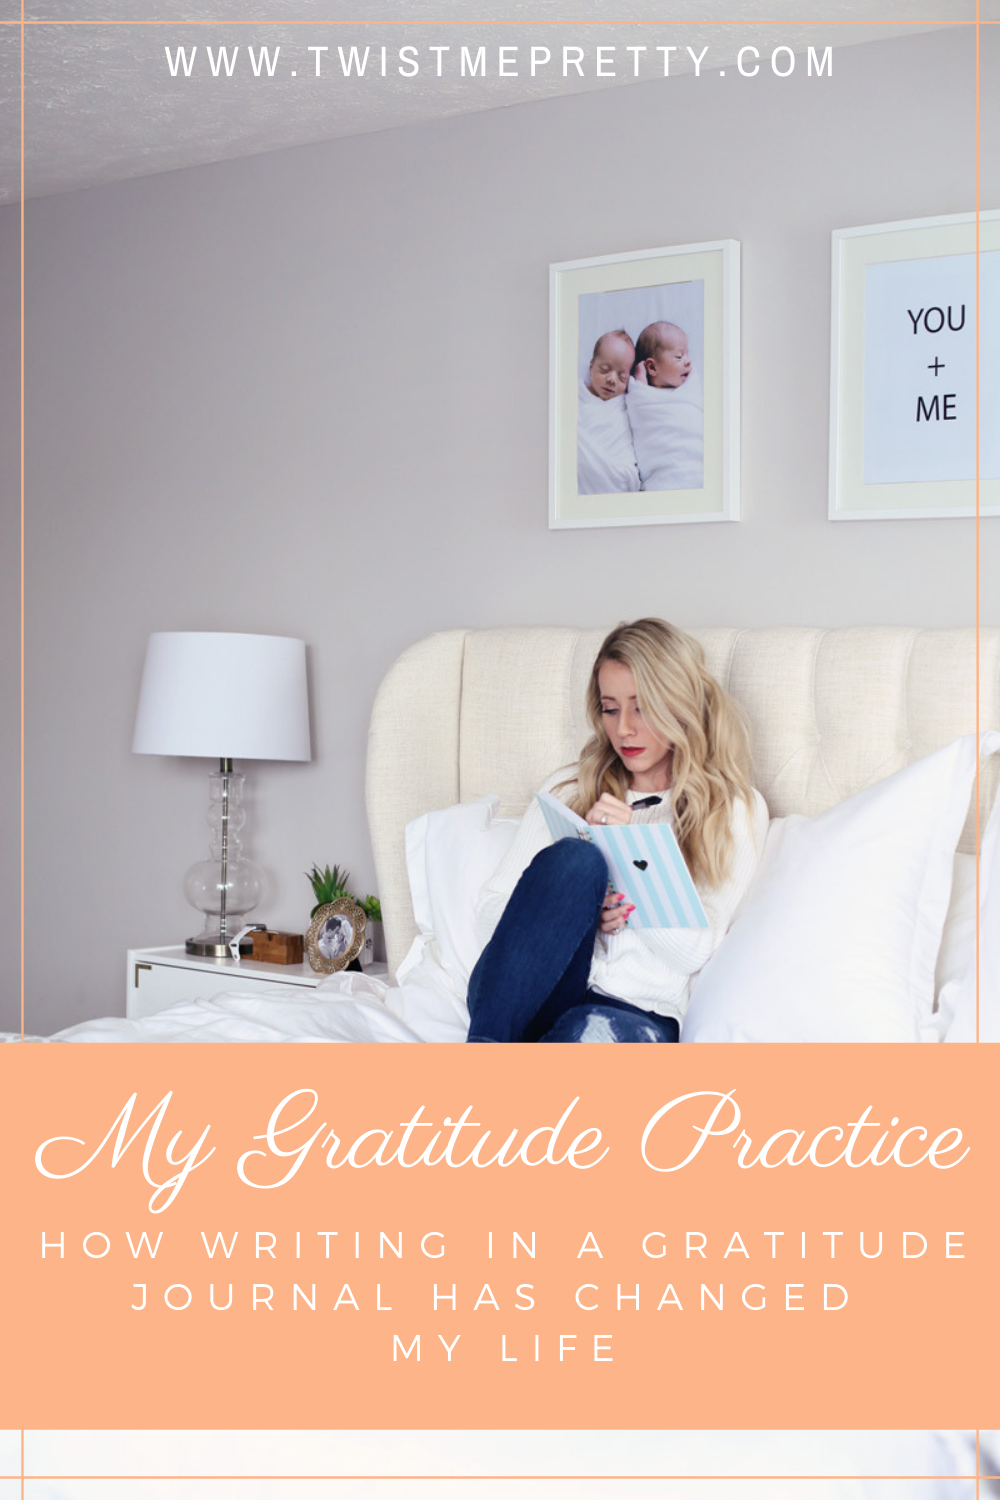 My gratitude practice- how writing in a gratitude journal has changed my life. www.twistmepretty.com